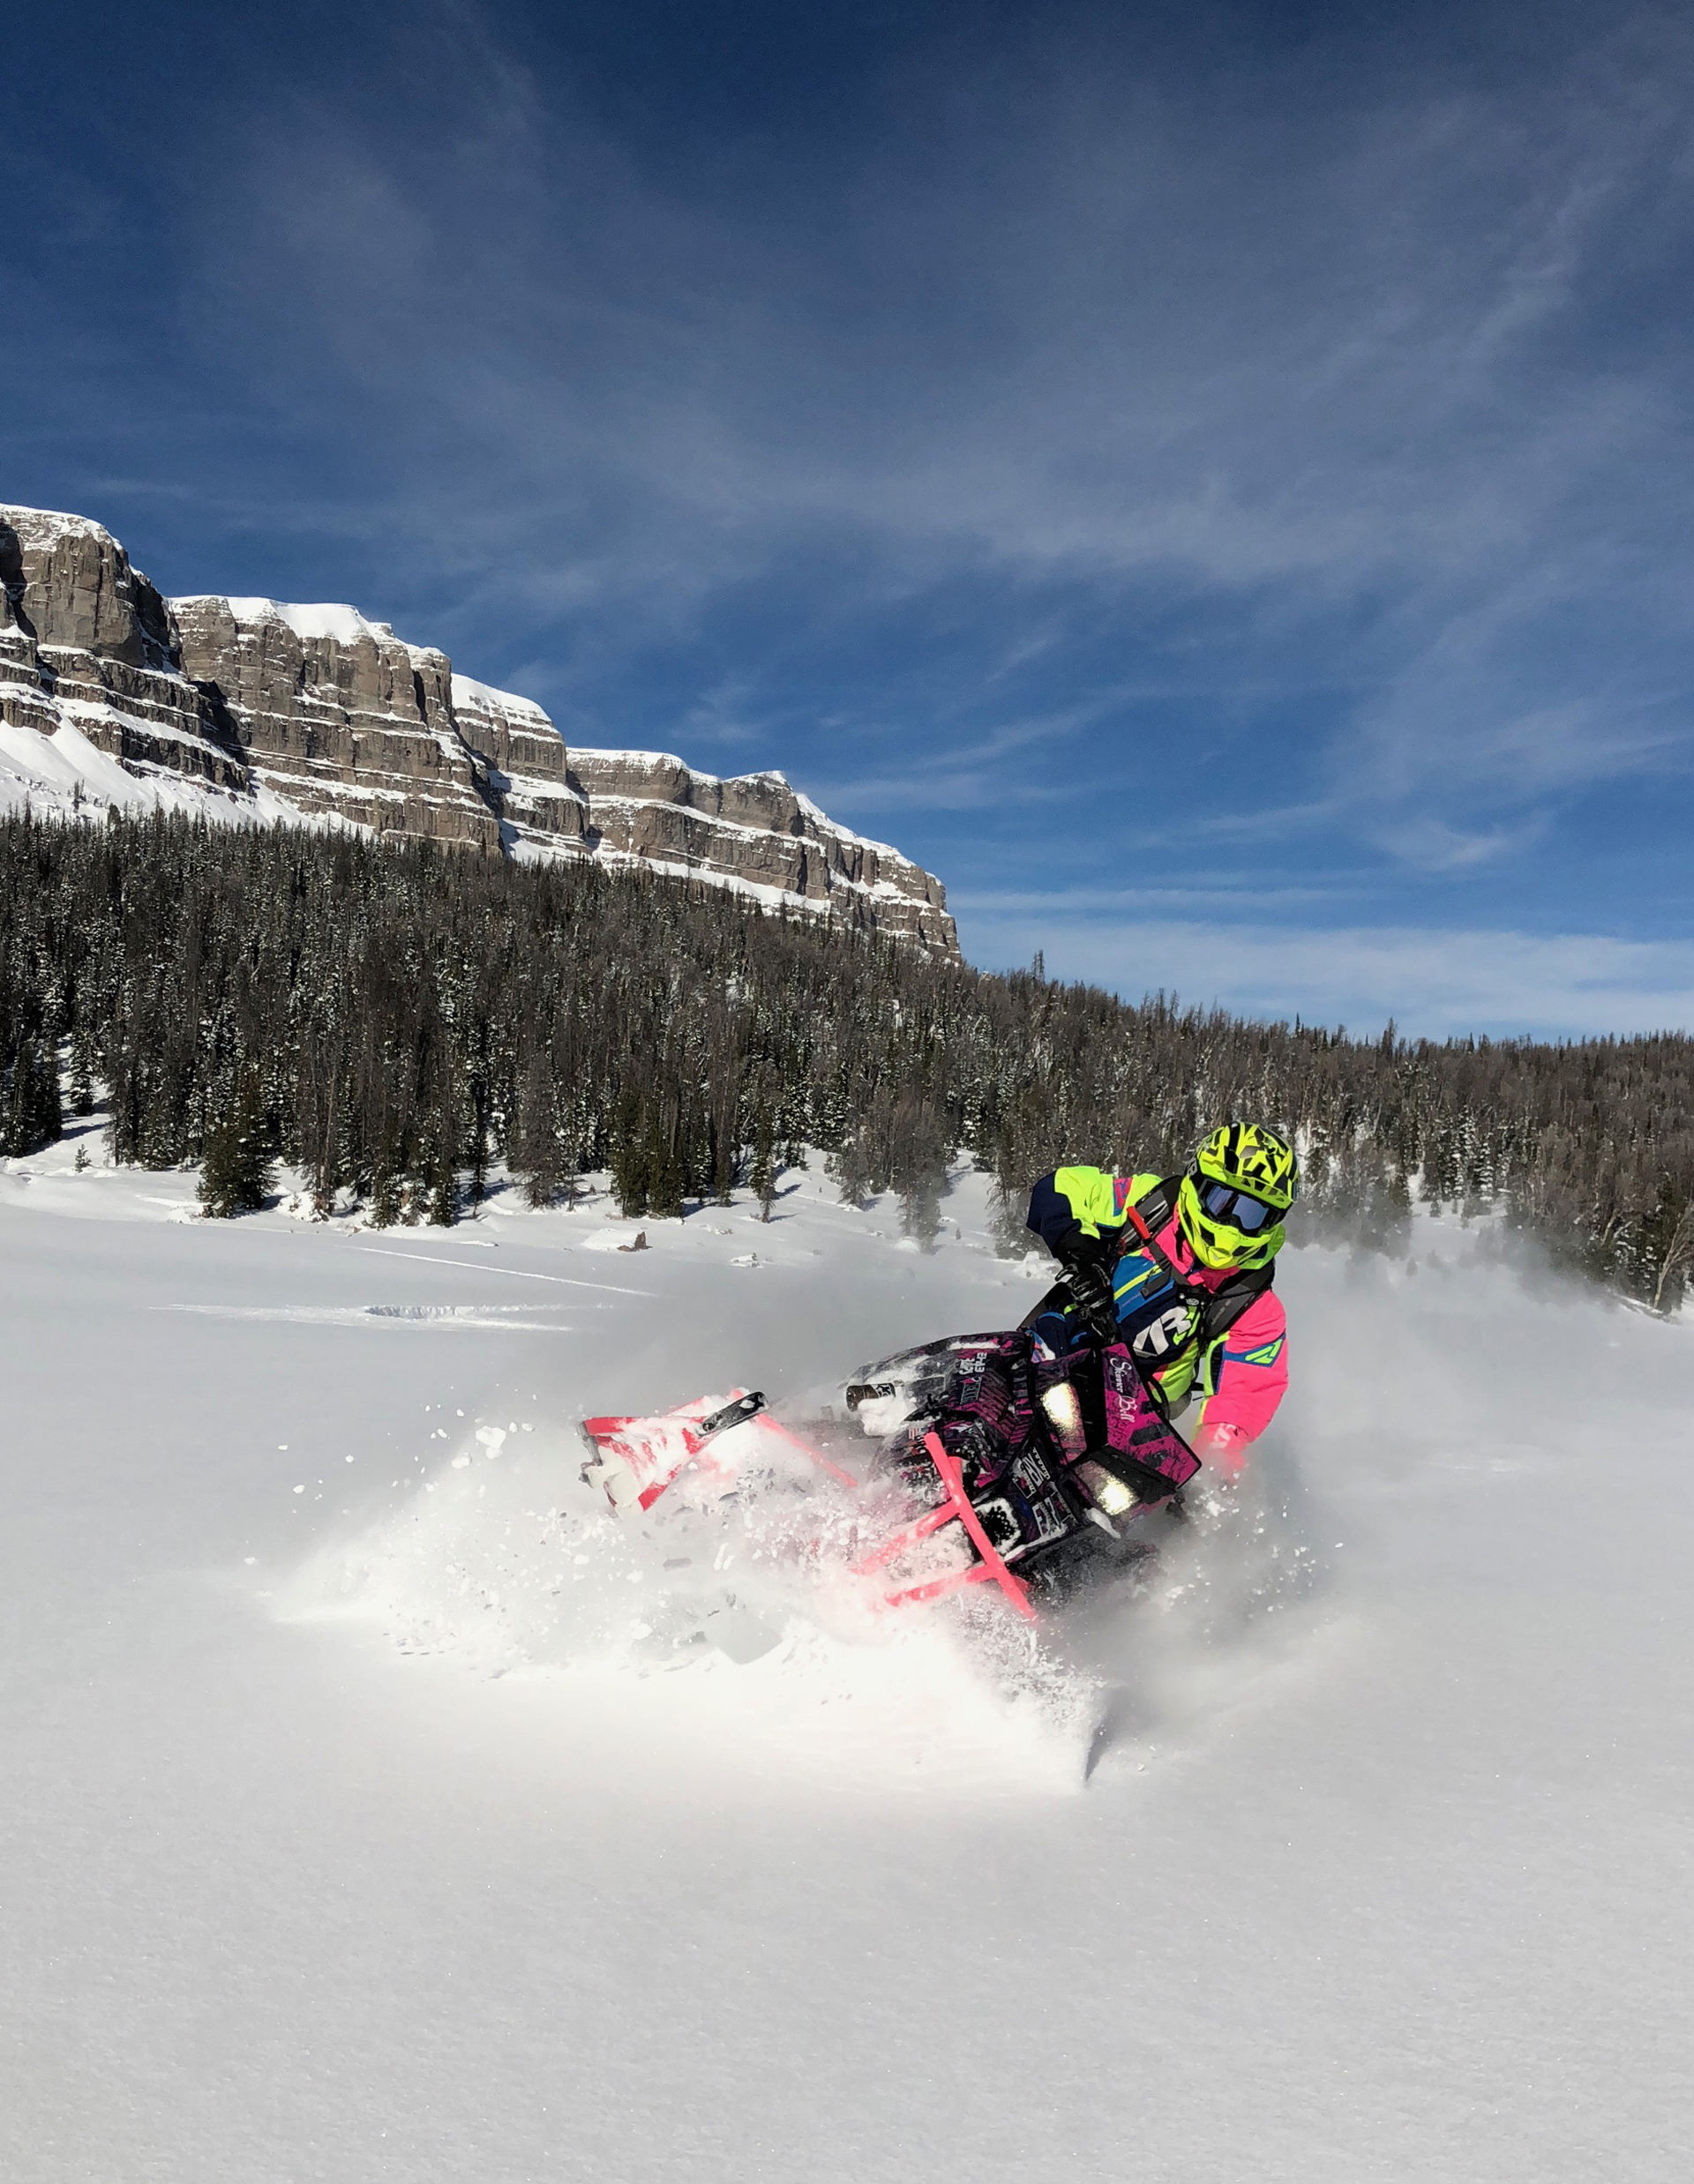 The most popular winter activity at Brooks Lake Lodge is snowmobiling, earning recent feature stories in SnoWest Magazine and American Snowmobiler for its epic conditions.